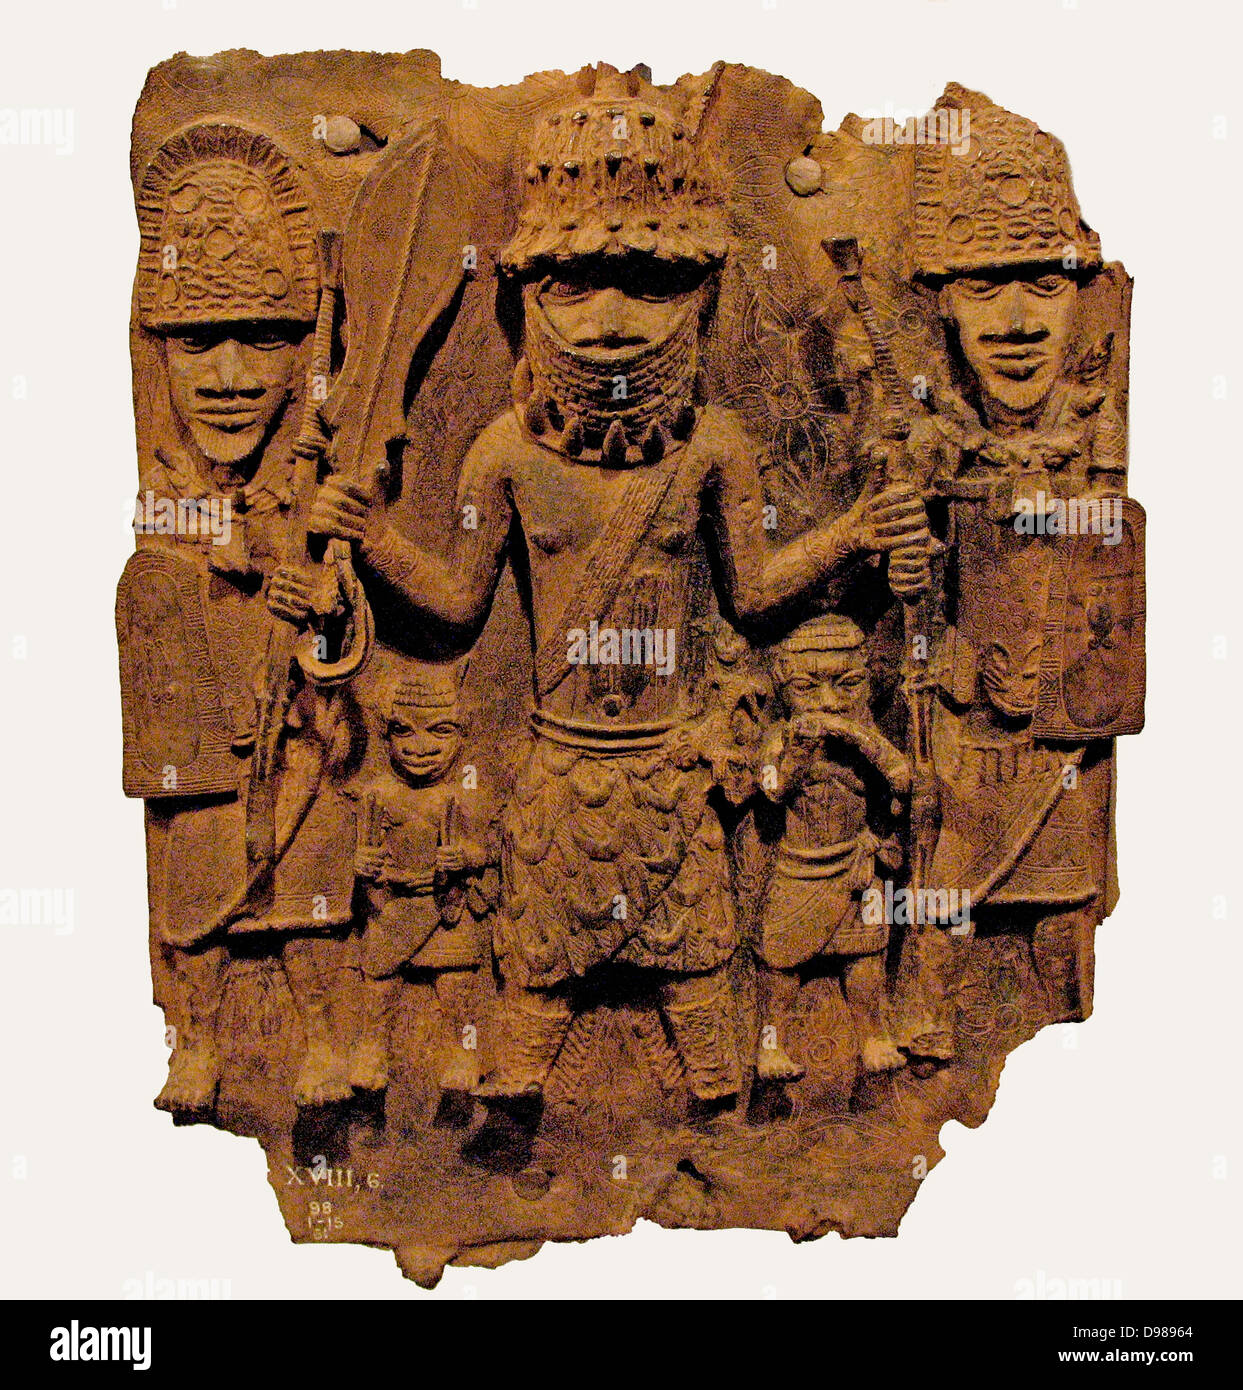 Plaque showing the facade of the royal palace.  Plaques may be seen attached to the pillars that support the palace roof.  They appear to have been made in matching pairs and are shown in such detail that some actual plaques can be readily identified.  Behind the main figures are two brass leopards and the stone axe heads that are kept on altars.  Attached to the roof of the tower is a large brass python. Stock Photo